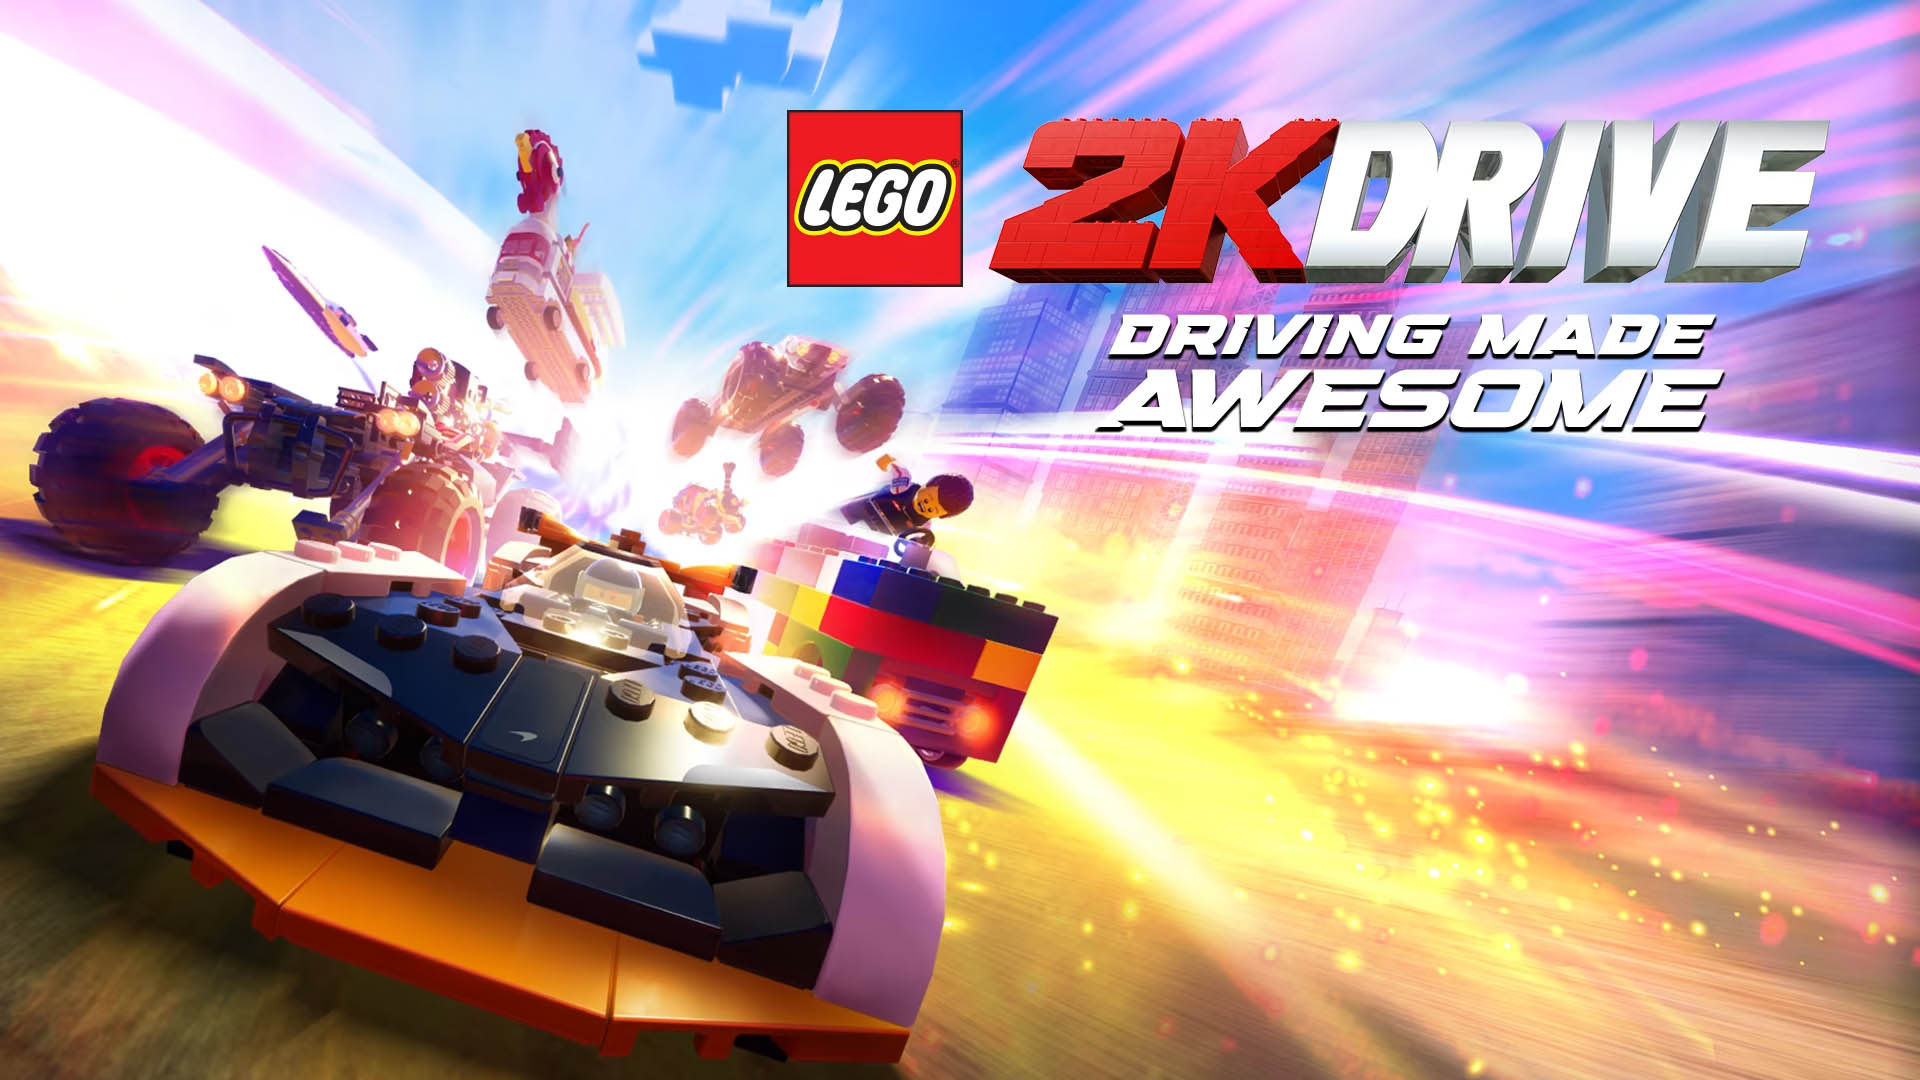 Lego 2K Drive announced, a new open-world driving-adventure game